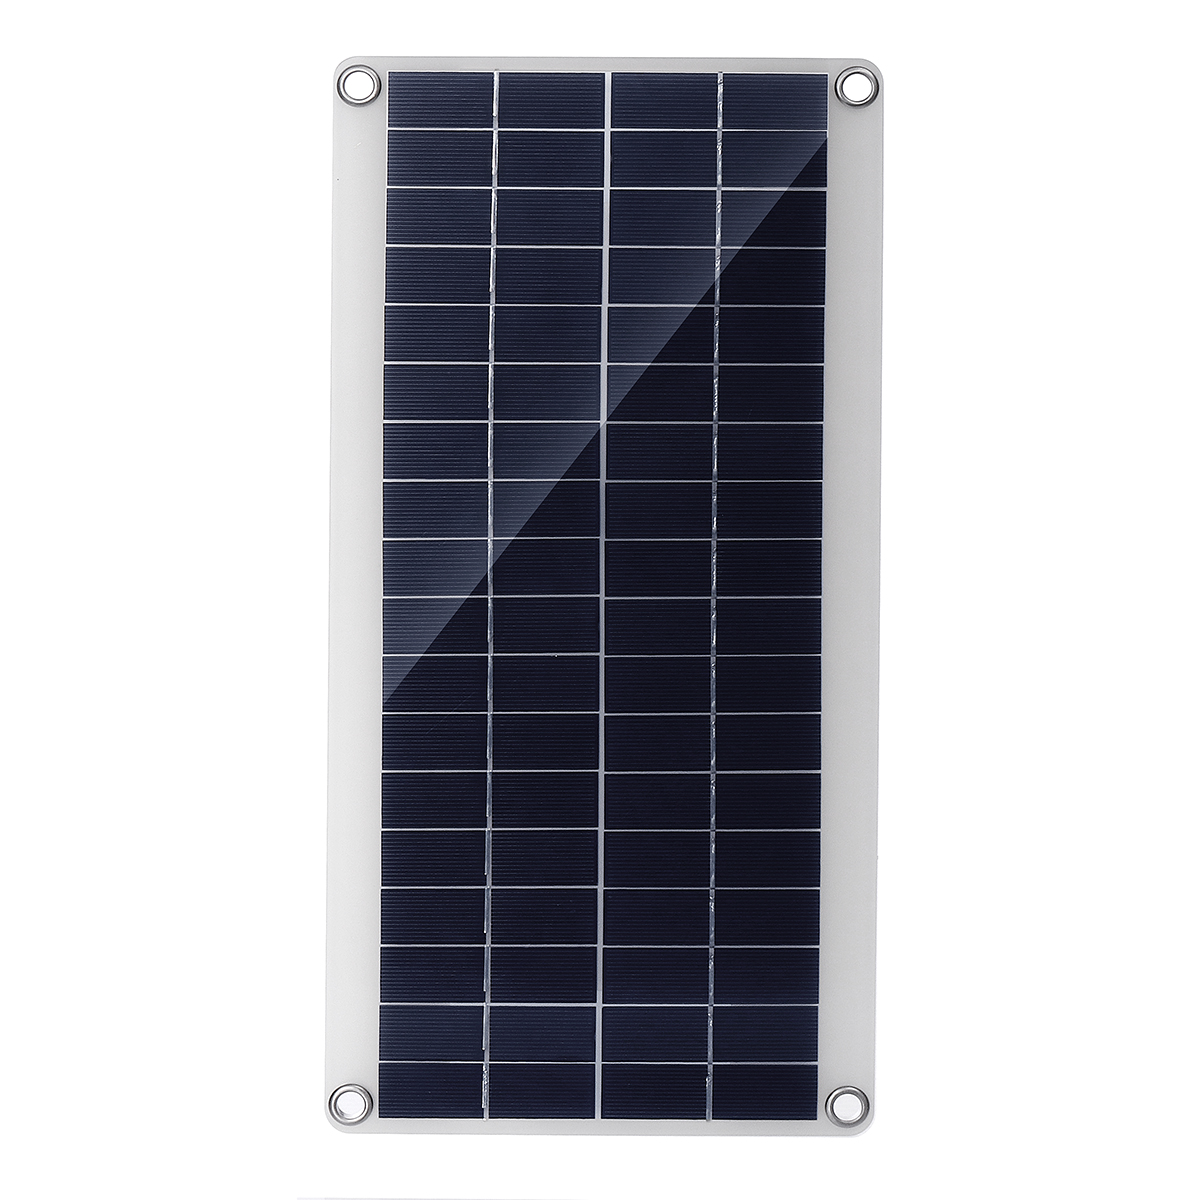 20W-Portable-Solar-Panel-Kit-DC-USB-Charging-Double-USB-Port-Suction-Cups-Camping-Traveling-1383681-3